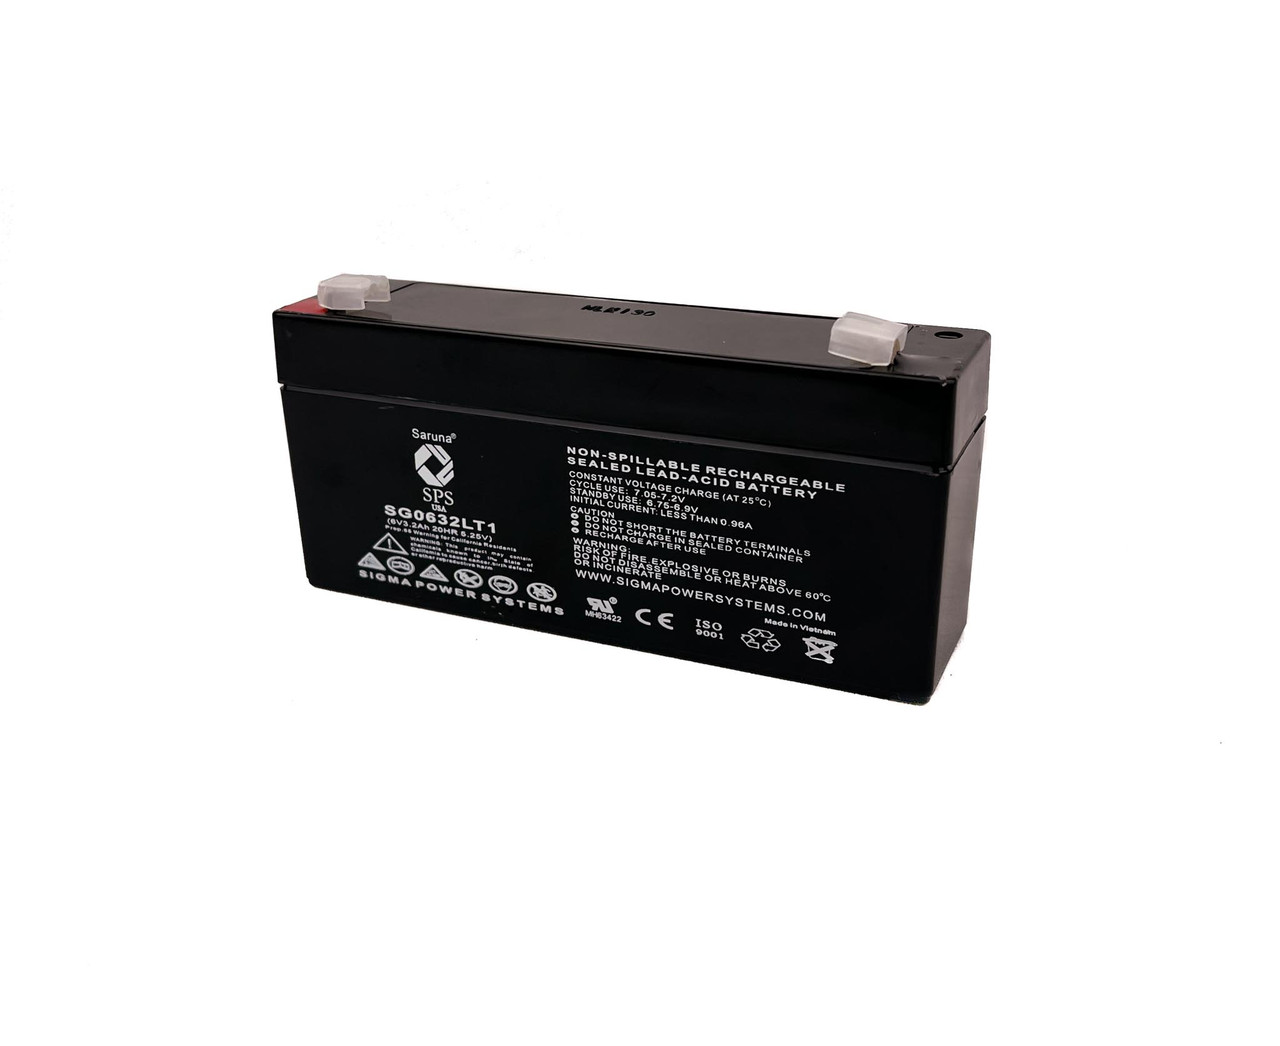 Raion Power 6V 3.2Ah Non-Spillable Replacement Rechargebale Battery for Health o meter 591KL Scale